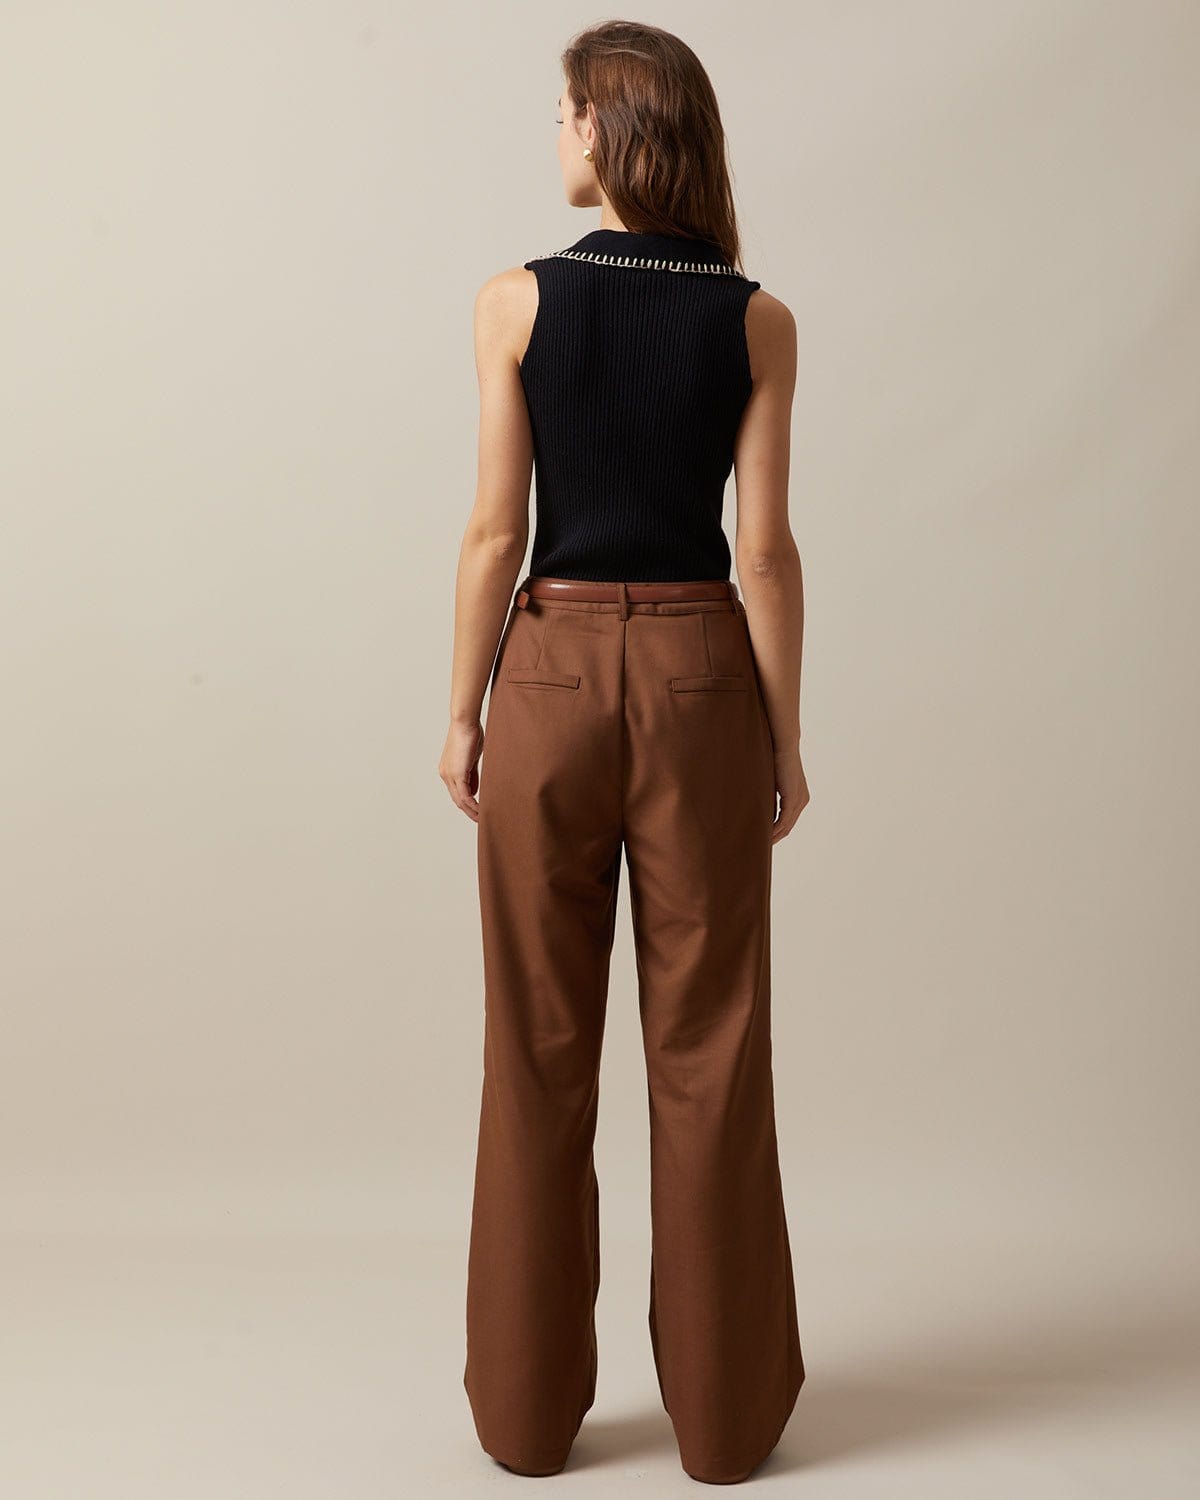 The Brown High Waisted Pleated Straight Pants